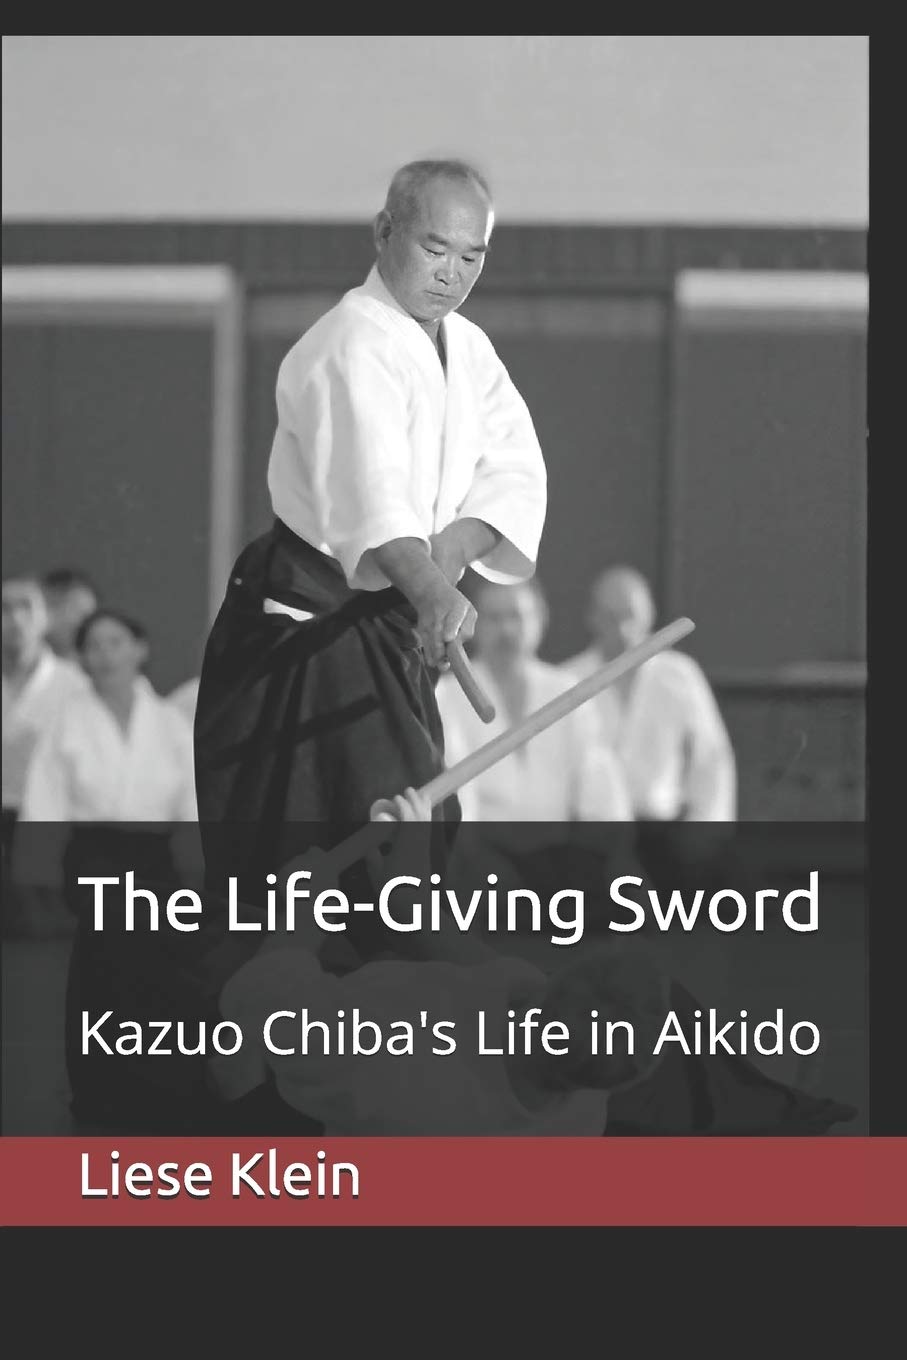 The Life-Giving Sword: Kazuo Chiba's Life in Aikido Book by Liese Klein - Budovideos